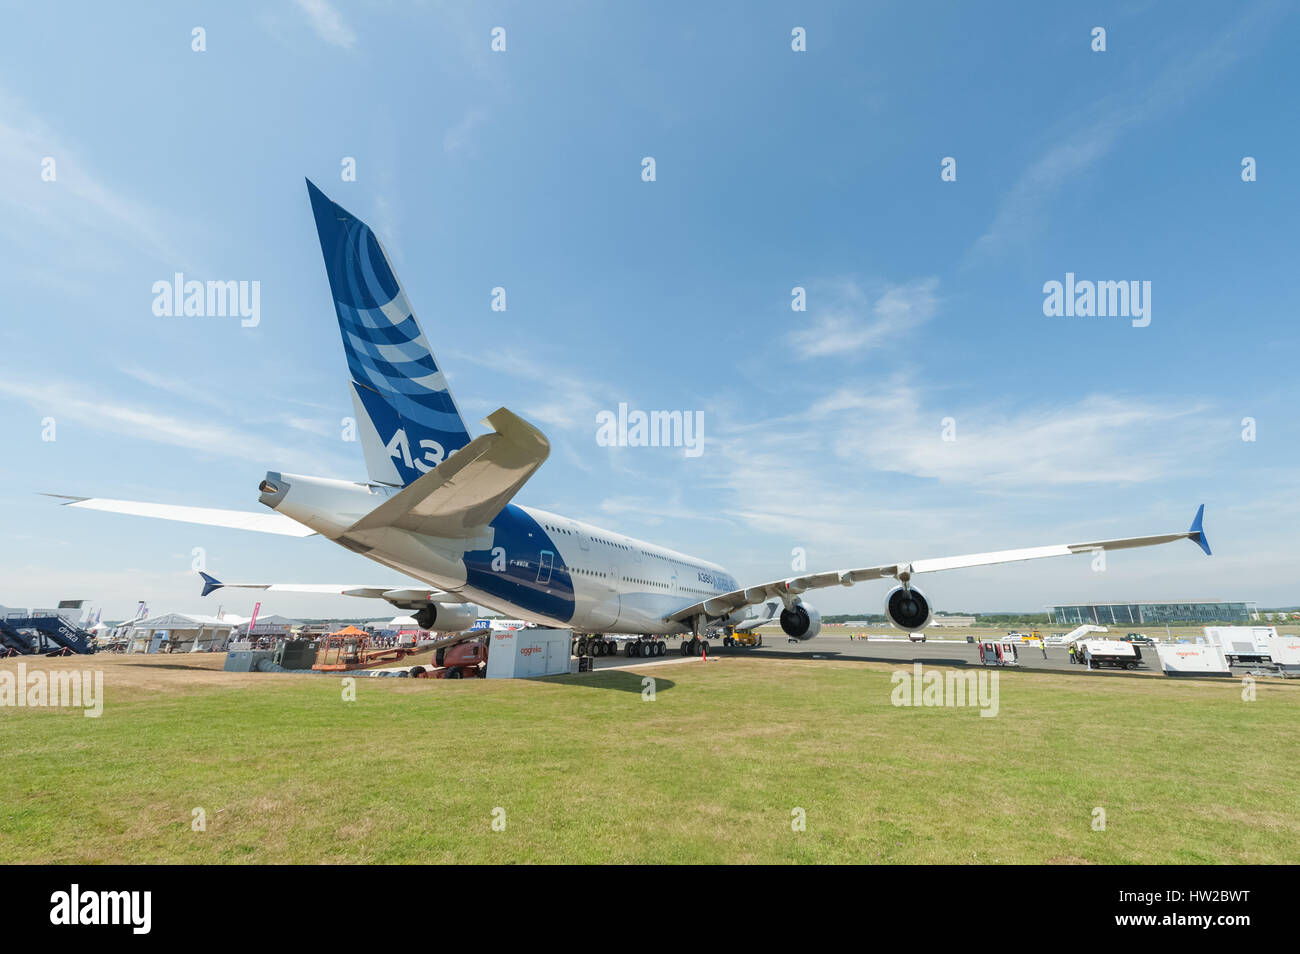 Double-decker Airbus A380 jet airliner on display at the Farnborough Airshow, UK Stock Photo